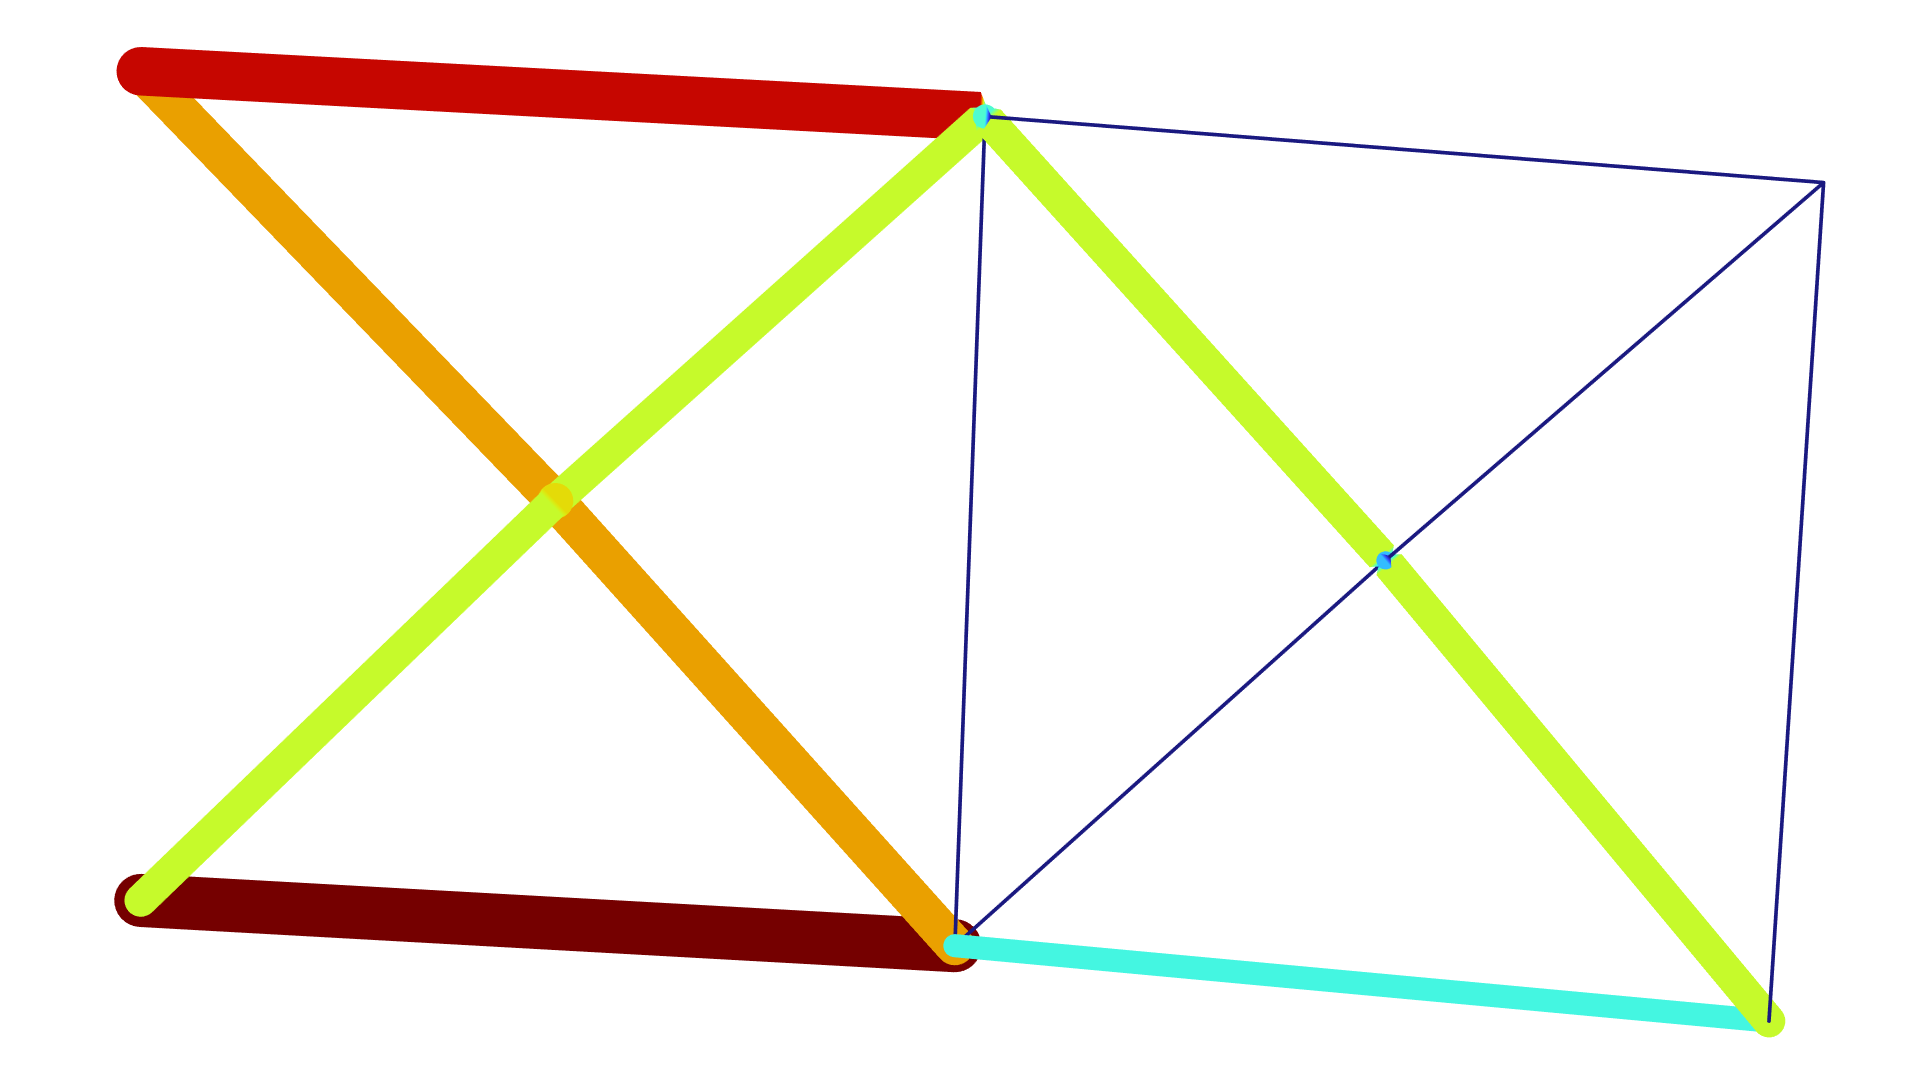 A 2D plot of a truss structure with the truss radius shown in different colors.